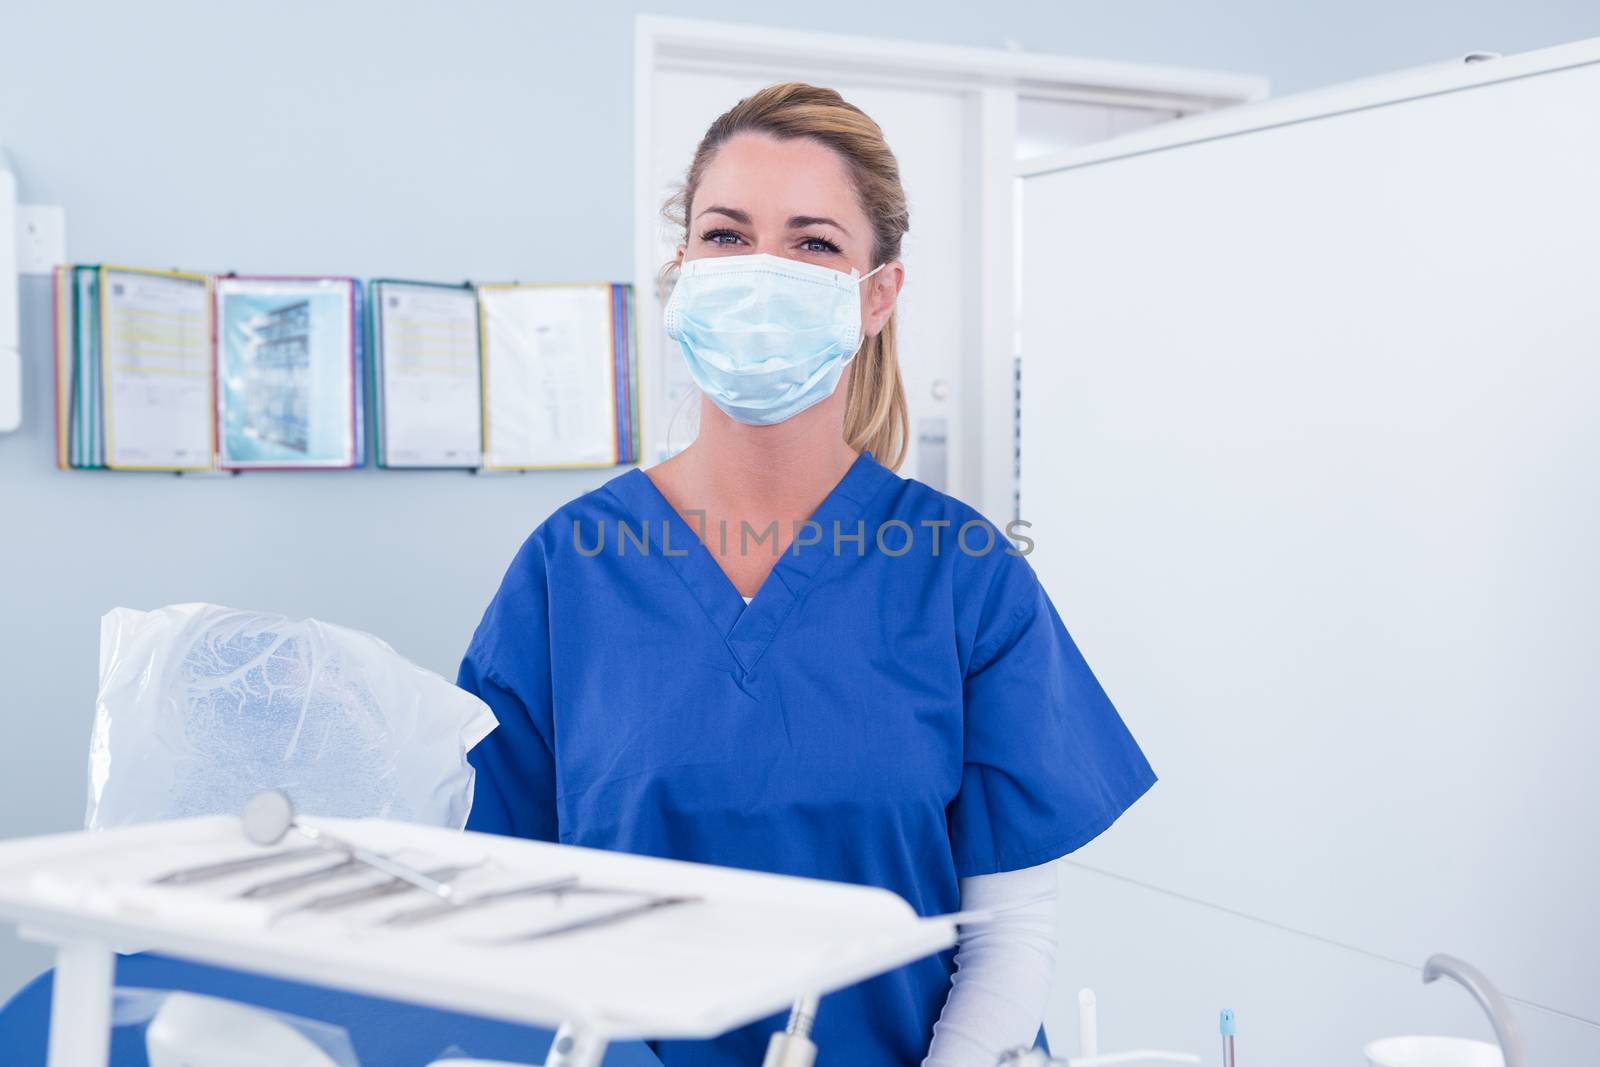 Dentist in mask behind tray of tools at the dental clinic